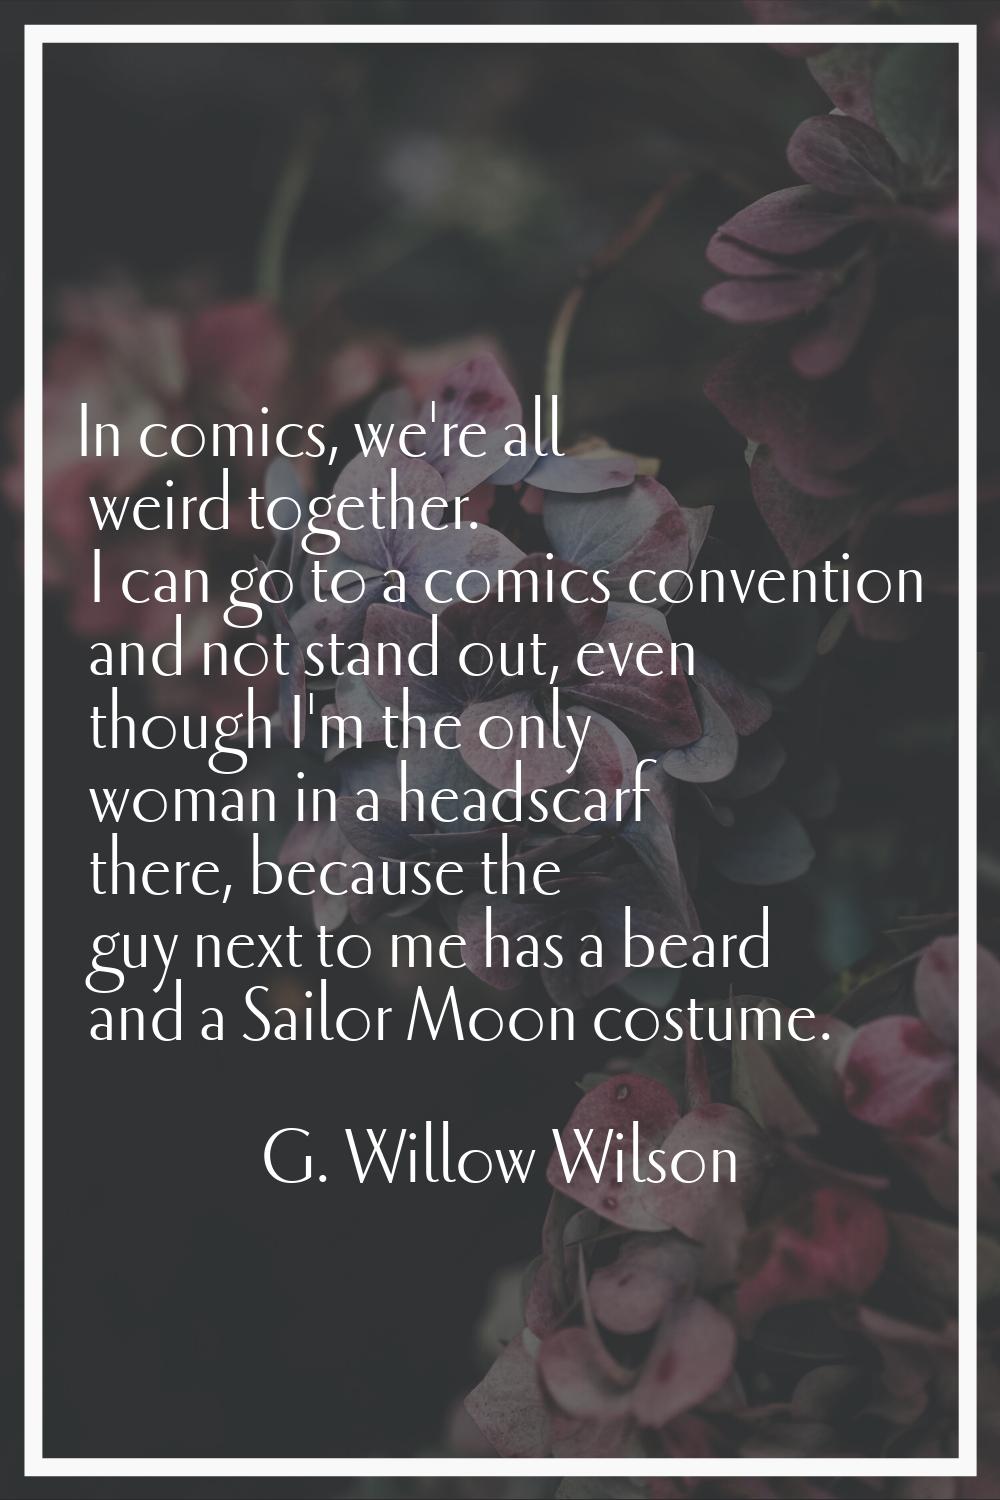 In comics, we're all weird together. I can go to a comics convention and not stand out, even though